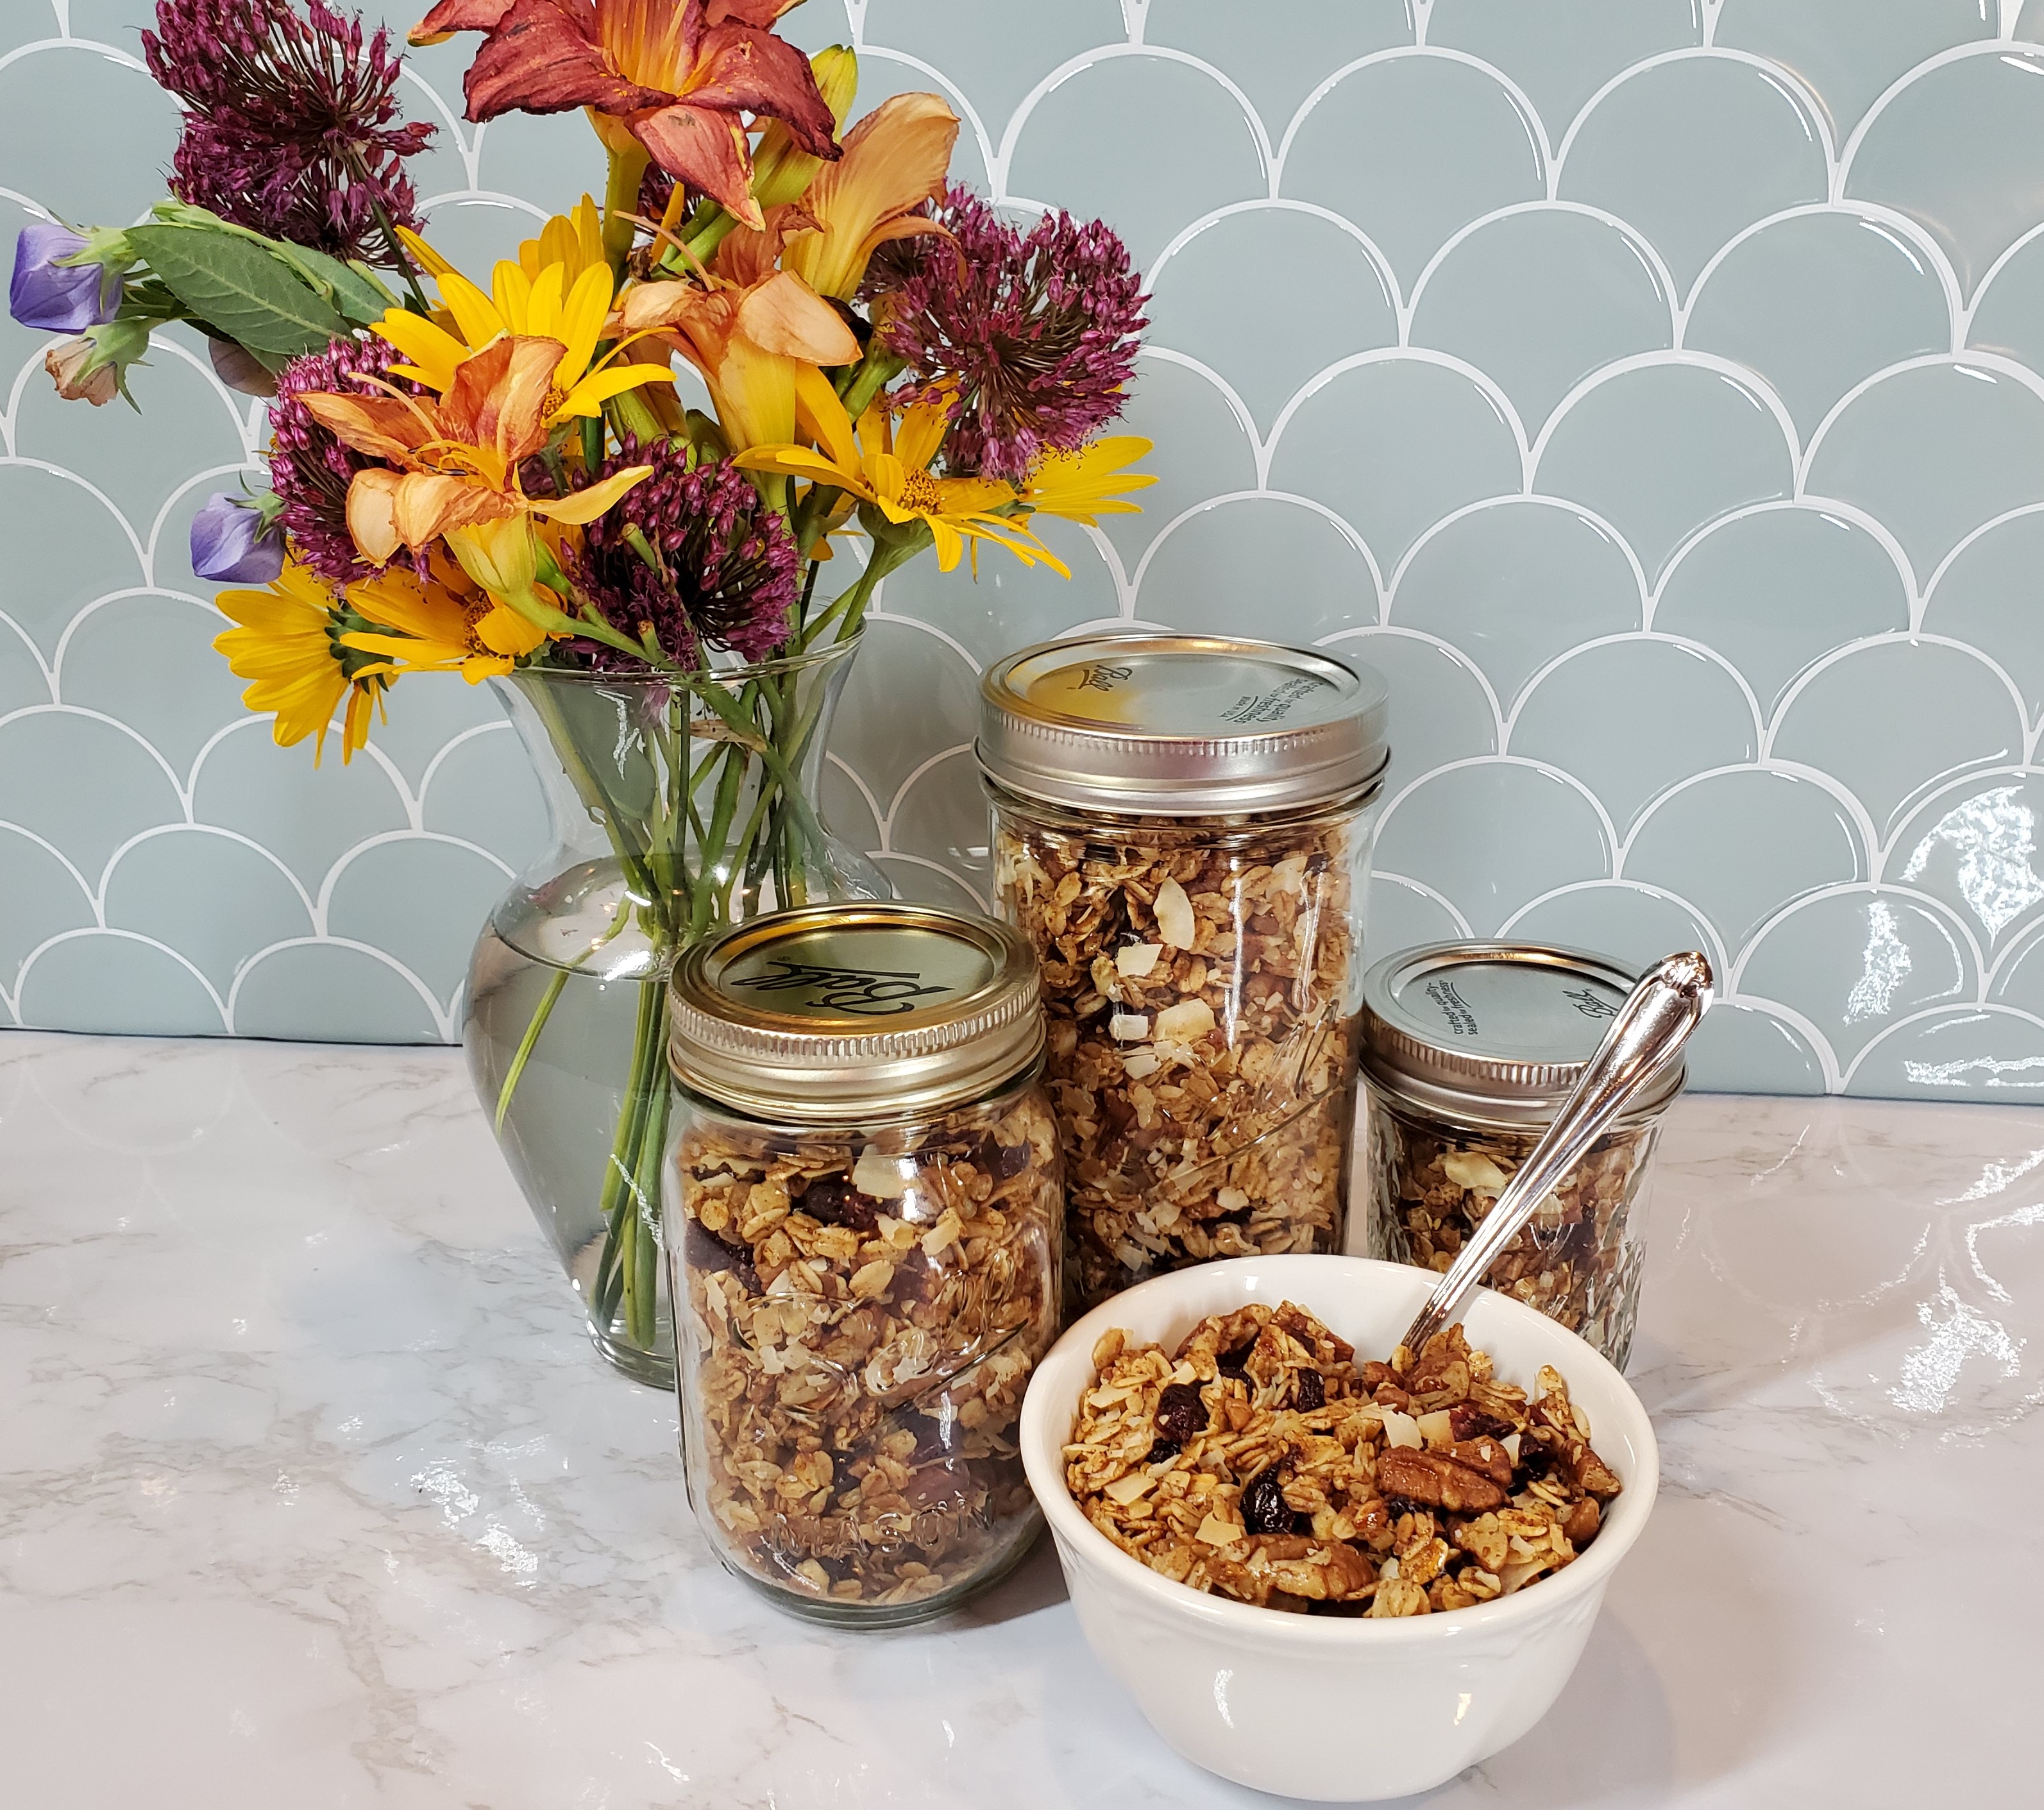 A bowl of pecan/craisin granola in a white bowl with a spoon sits in front of three Mason jars of granola on a white granite counter top. Behind it is a vase filled with yellow, pink and purple flowers and a shell turquoise tile backsplash.